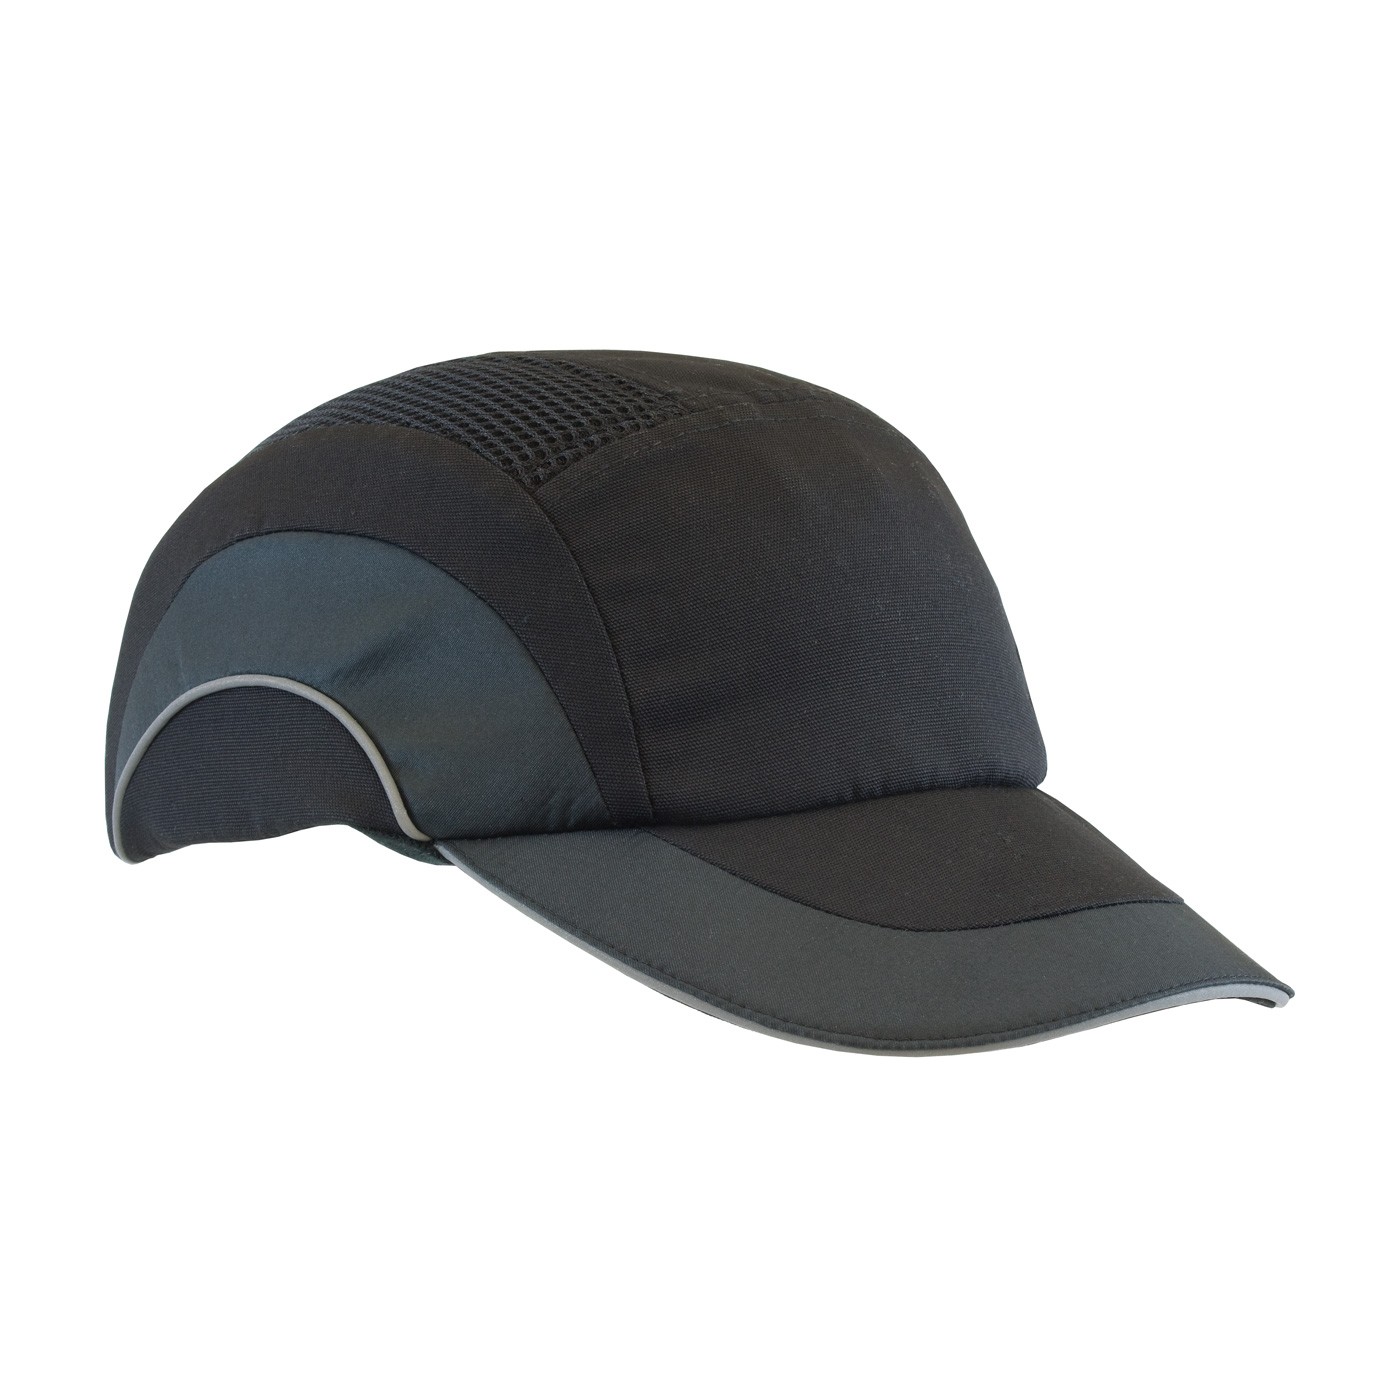 HardCap A1+™ Baseball Style Bump Cap with HDPE Protective Liner and Adjustable Back  (#282-ABR170)